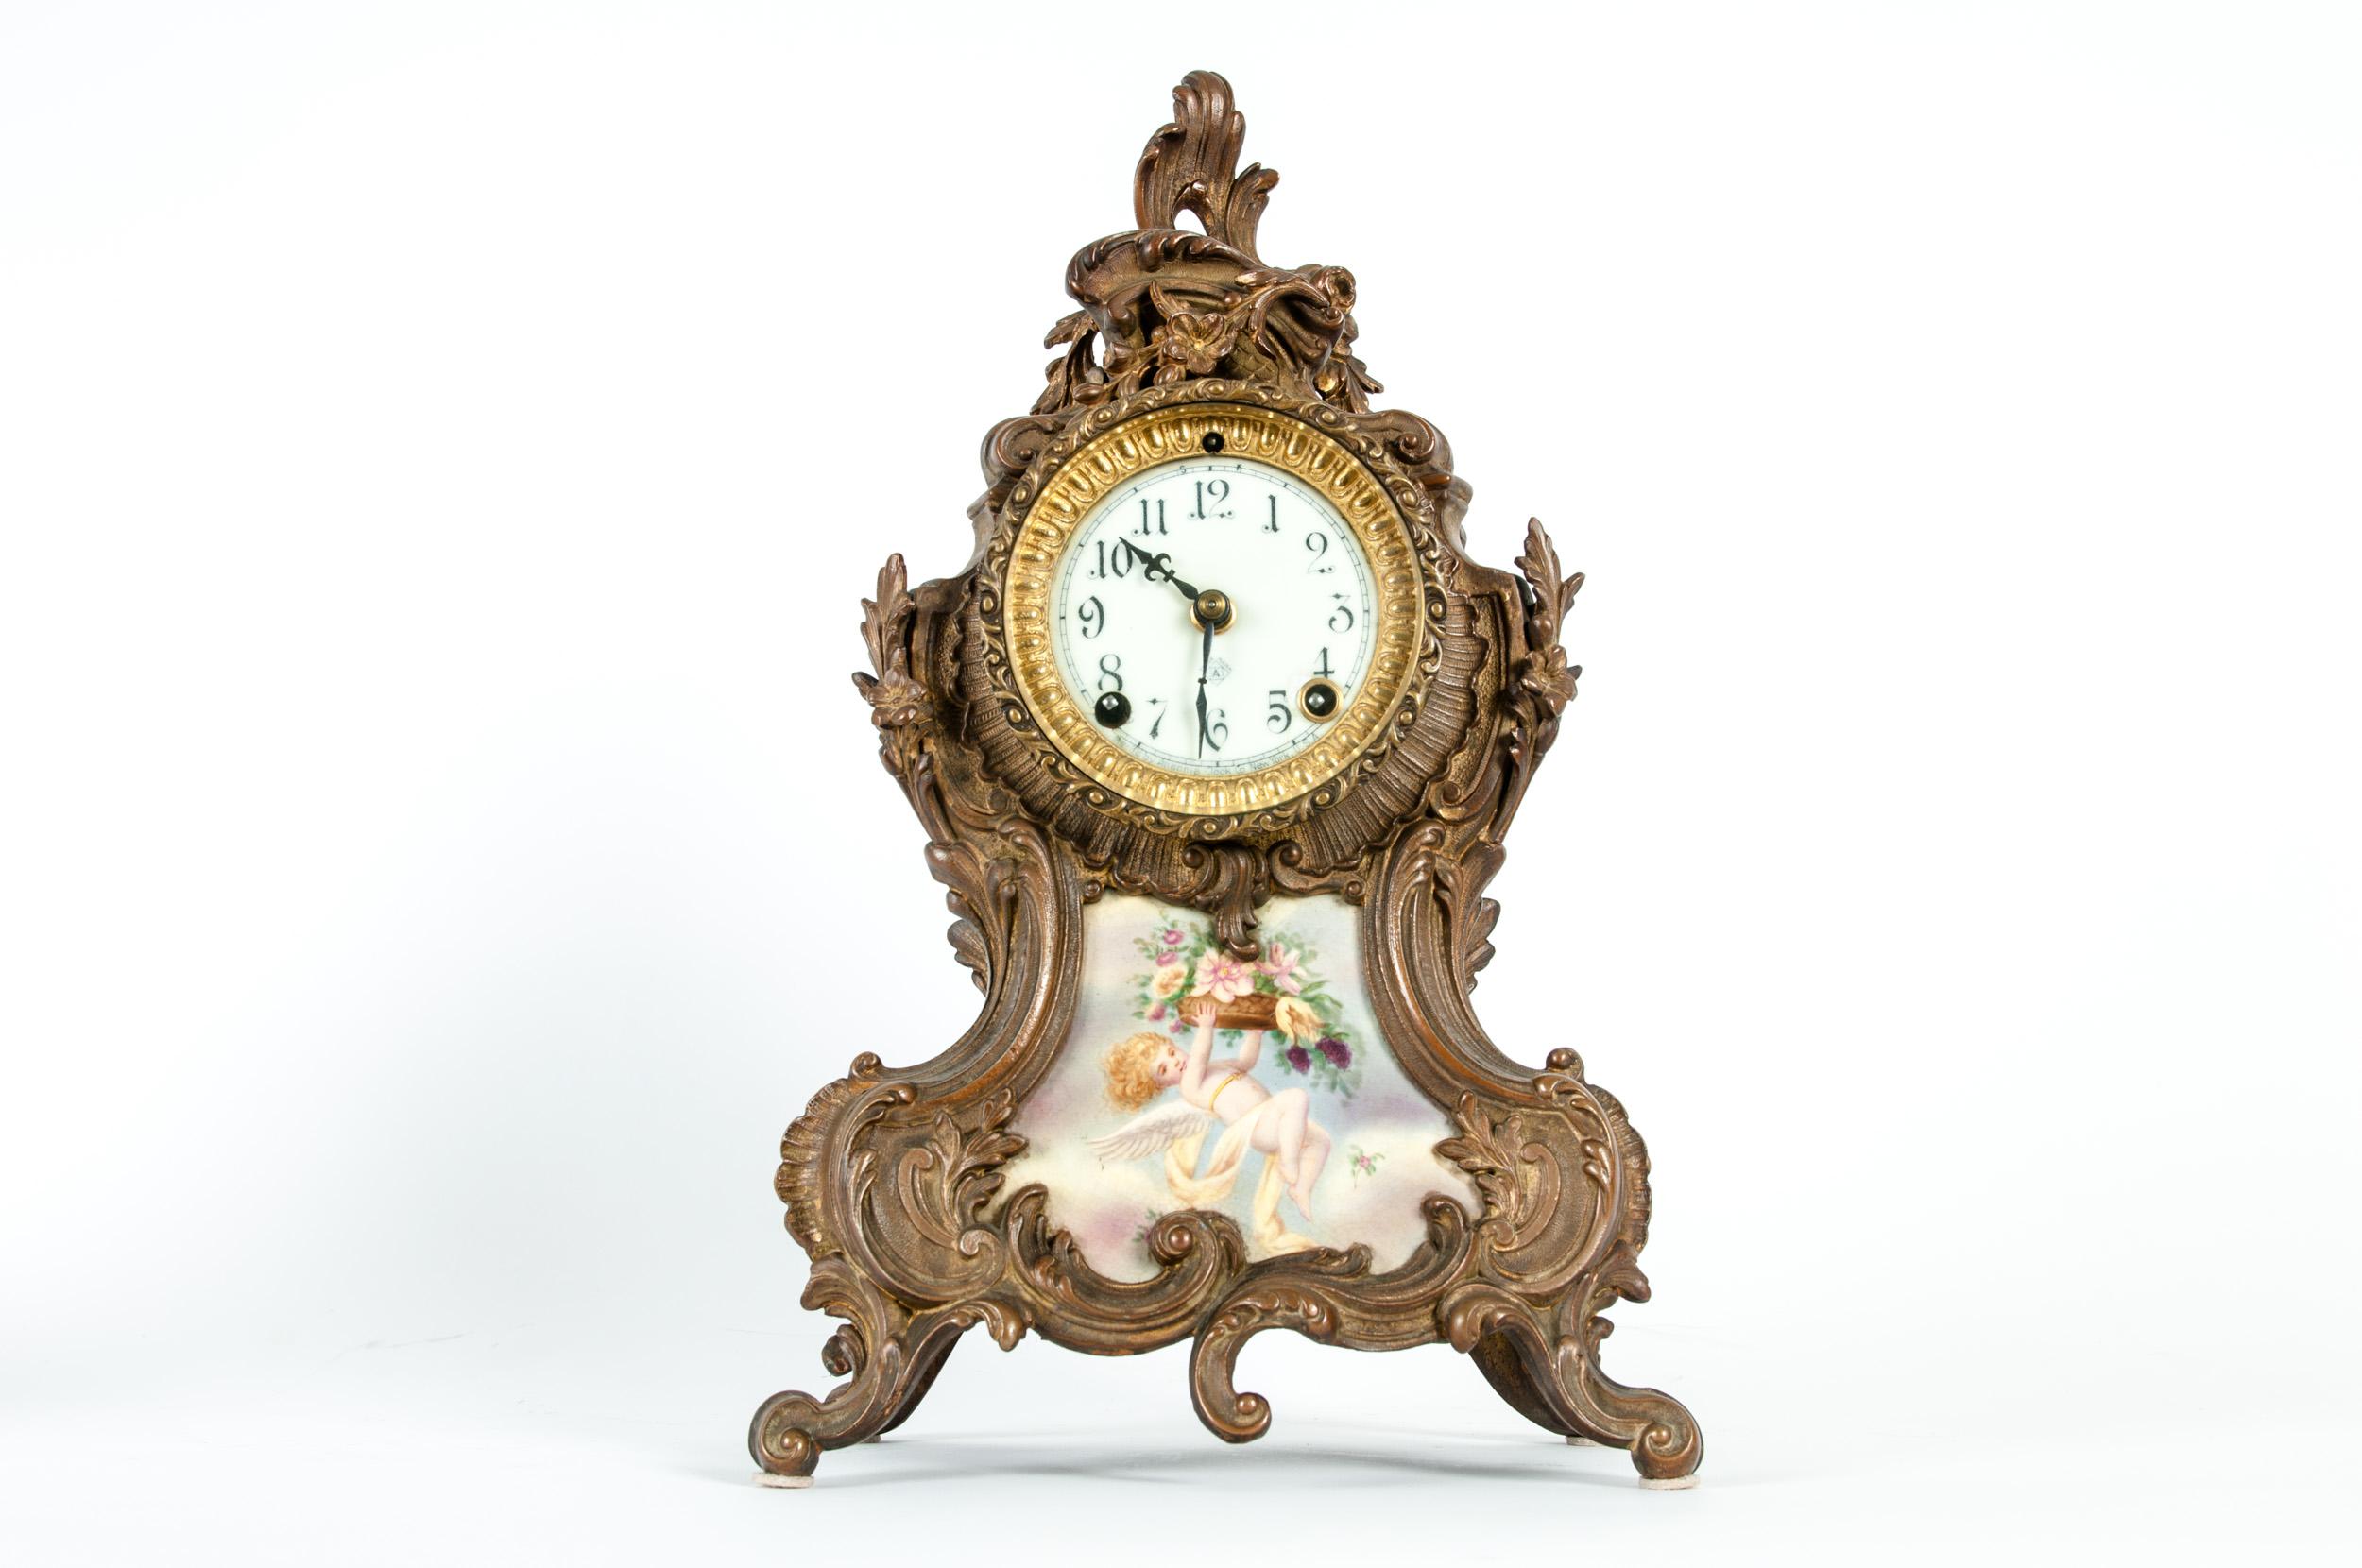 Early 19th century bronze mounted porcelain face Louis XVI style North American desk clock. The clock is in great antique condition with wear appropriate to age / use. The clock measure about 15 inches high x 8 inches wide x 4.5 inches deep.